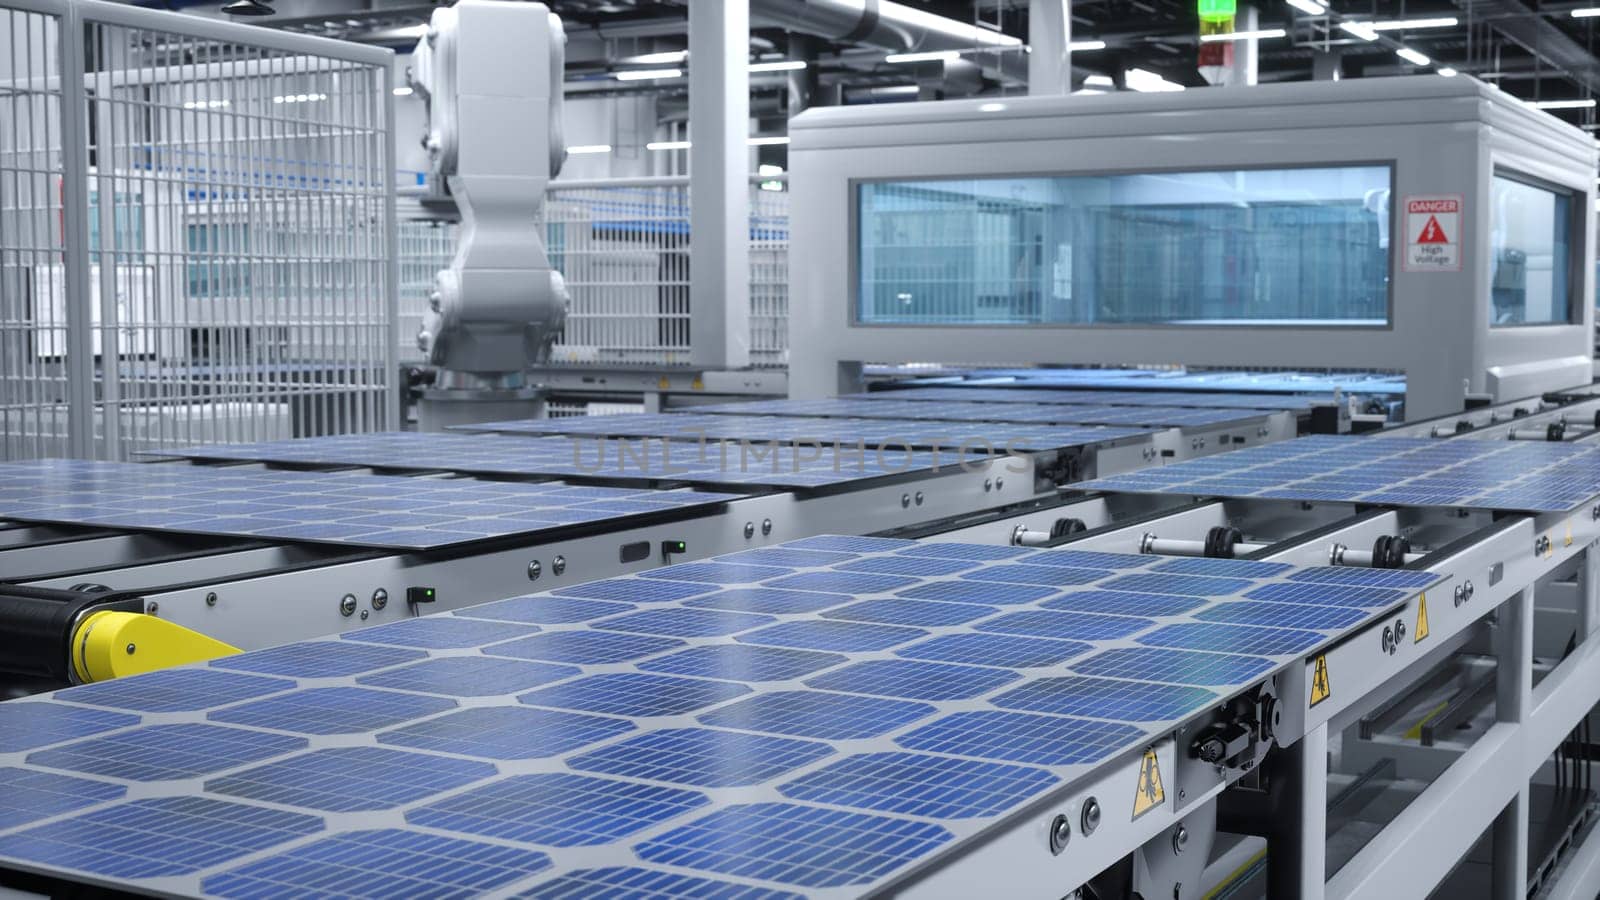 Robot arms in cutting edge solar panel warehouse handling photovoltaic modules on large assembly lines. Company manufacturing solar cells in renewable energy producing facility, 3D illustration